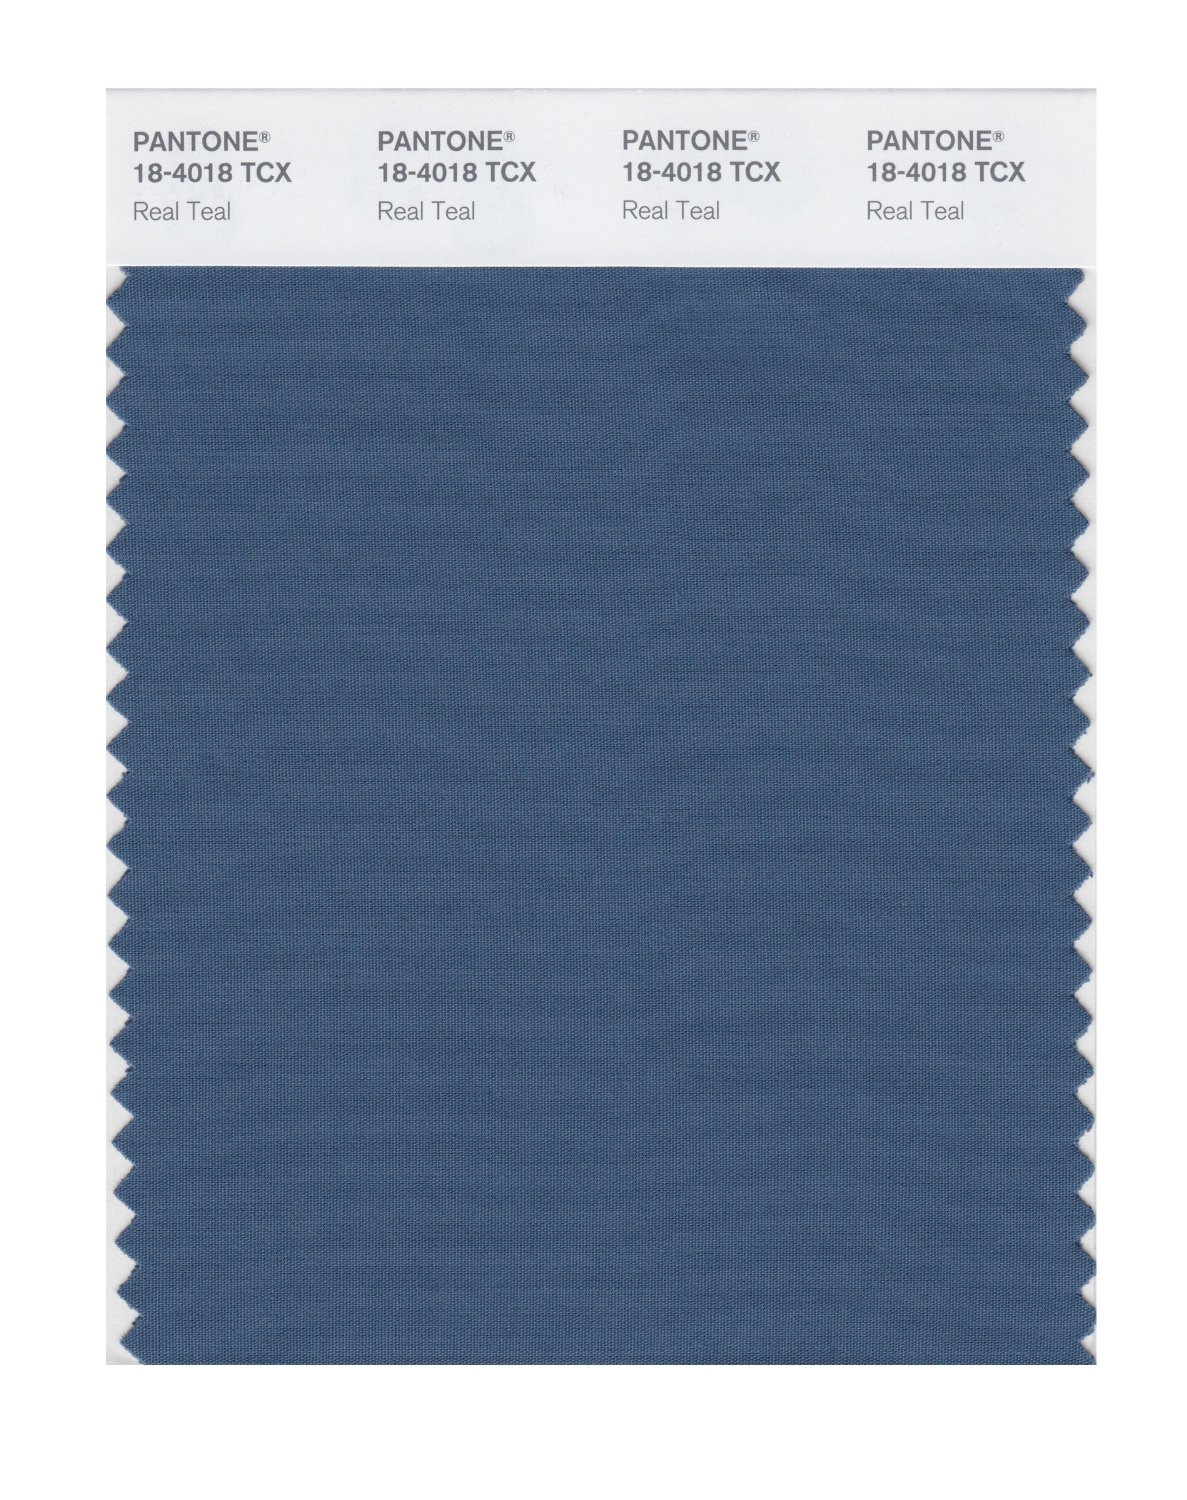 Pantone Cotton Swatch 18-4018 Real Teal